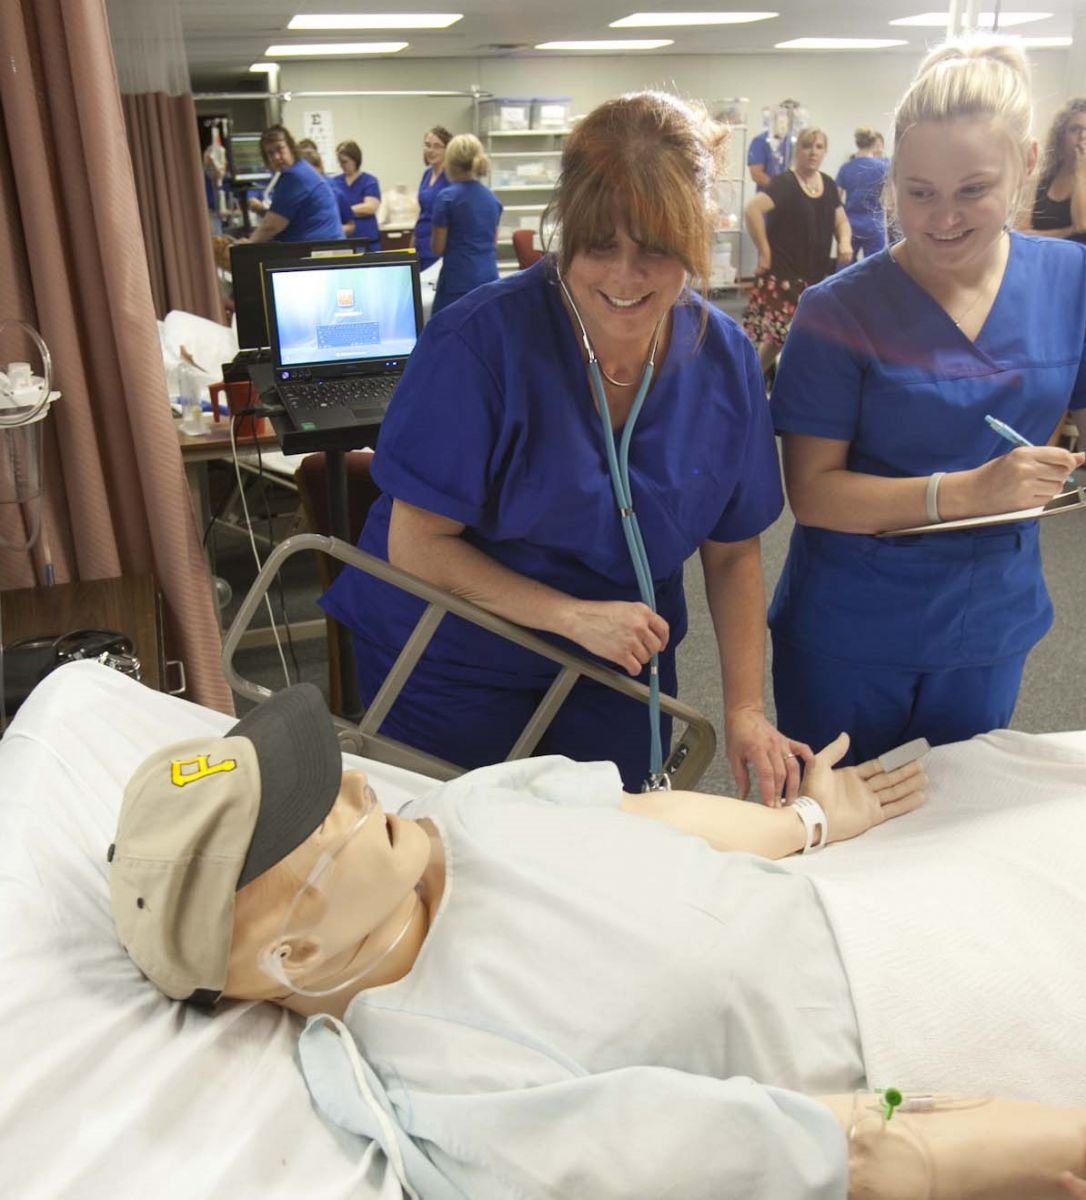 Two female Nursing students practicing skills on a simulation mannequin